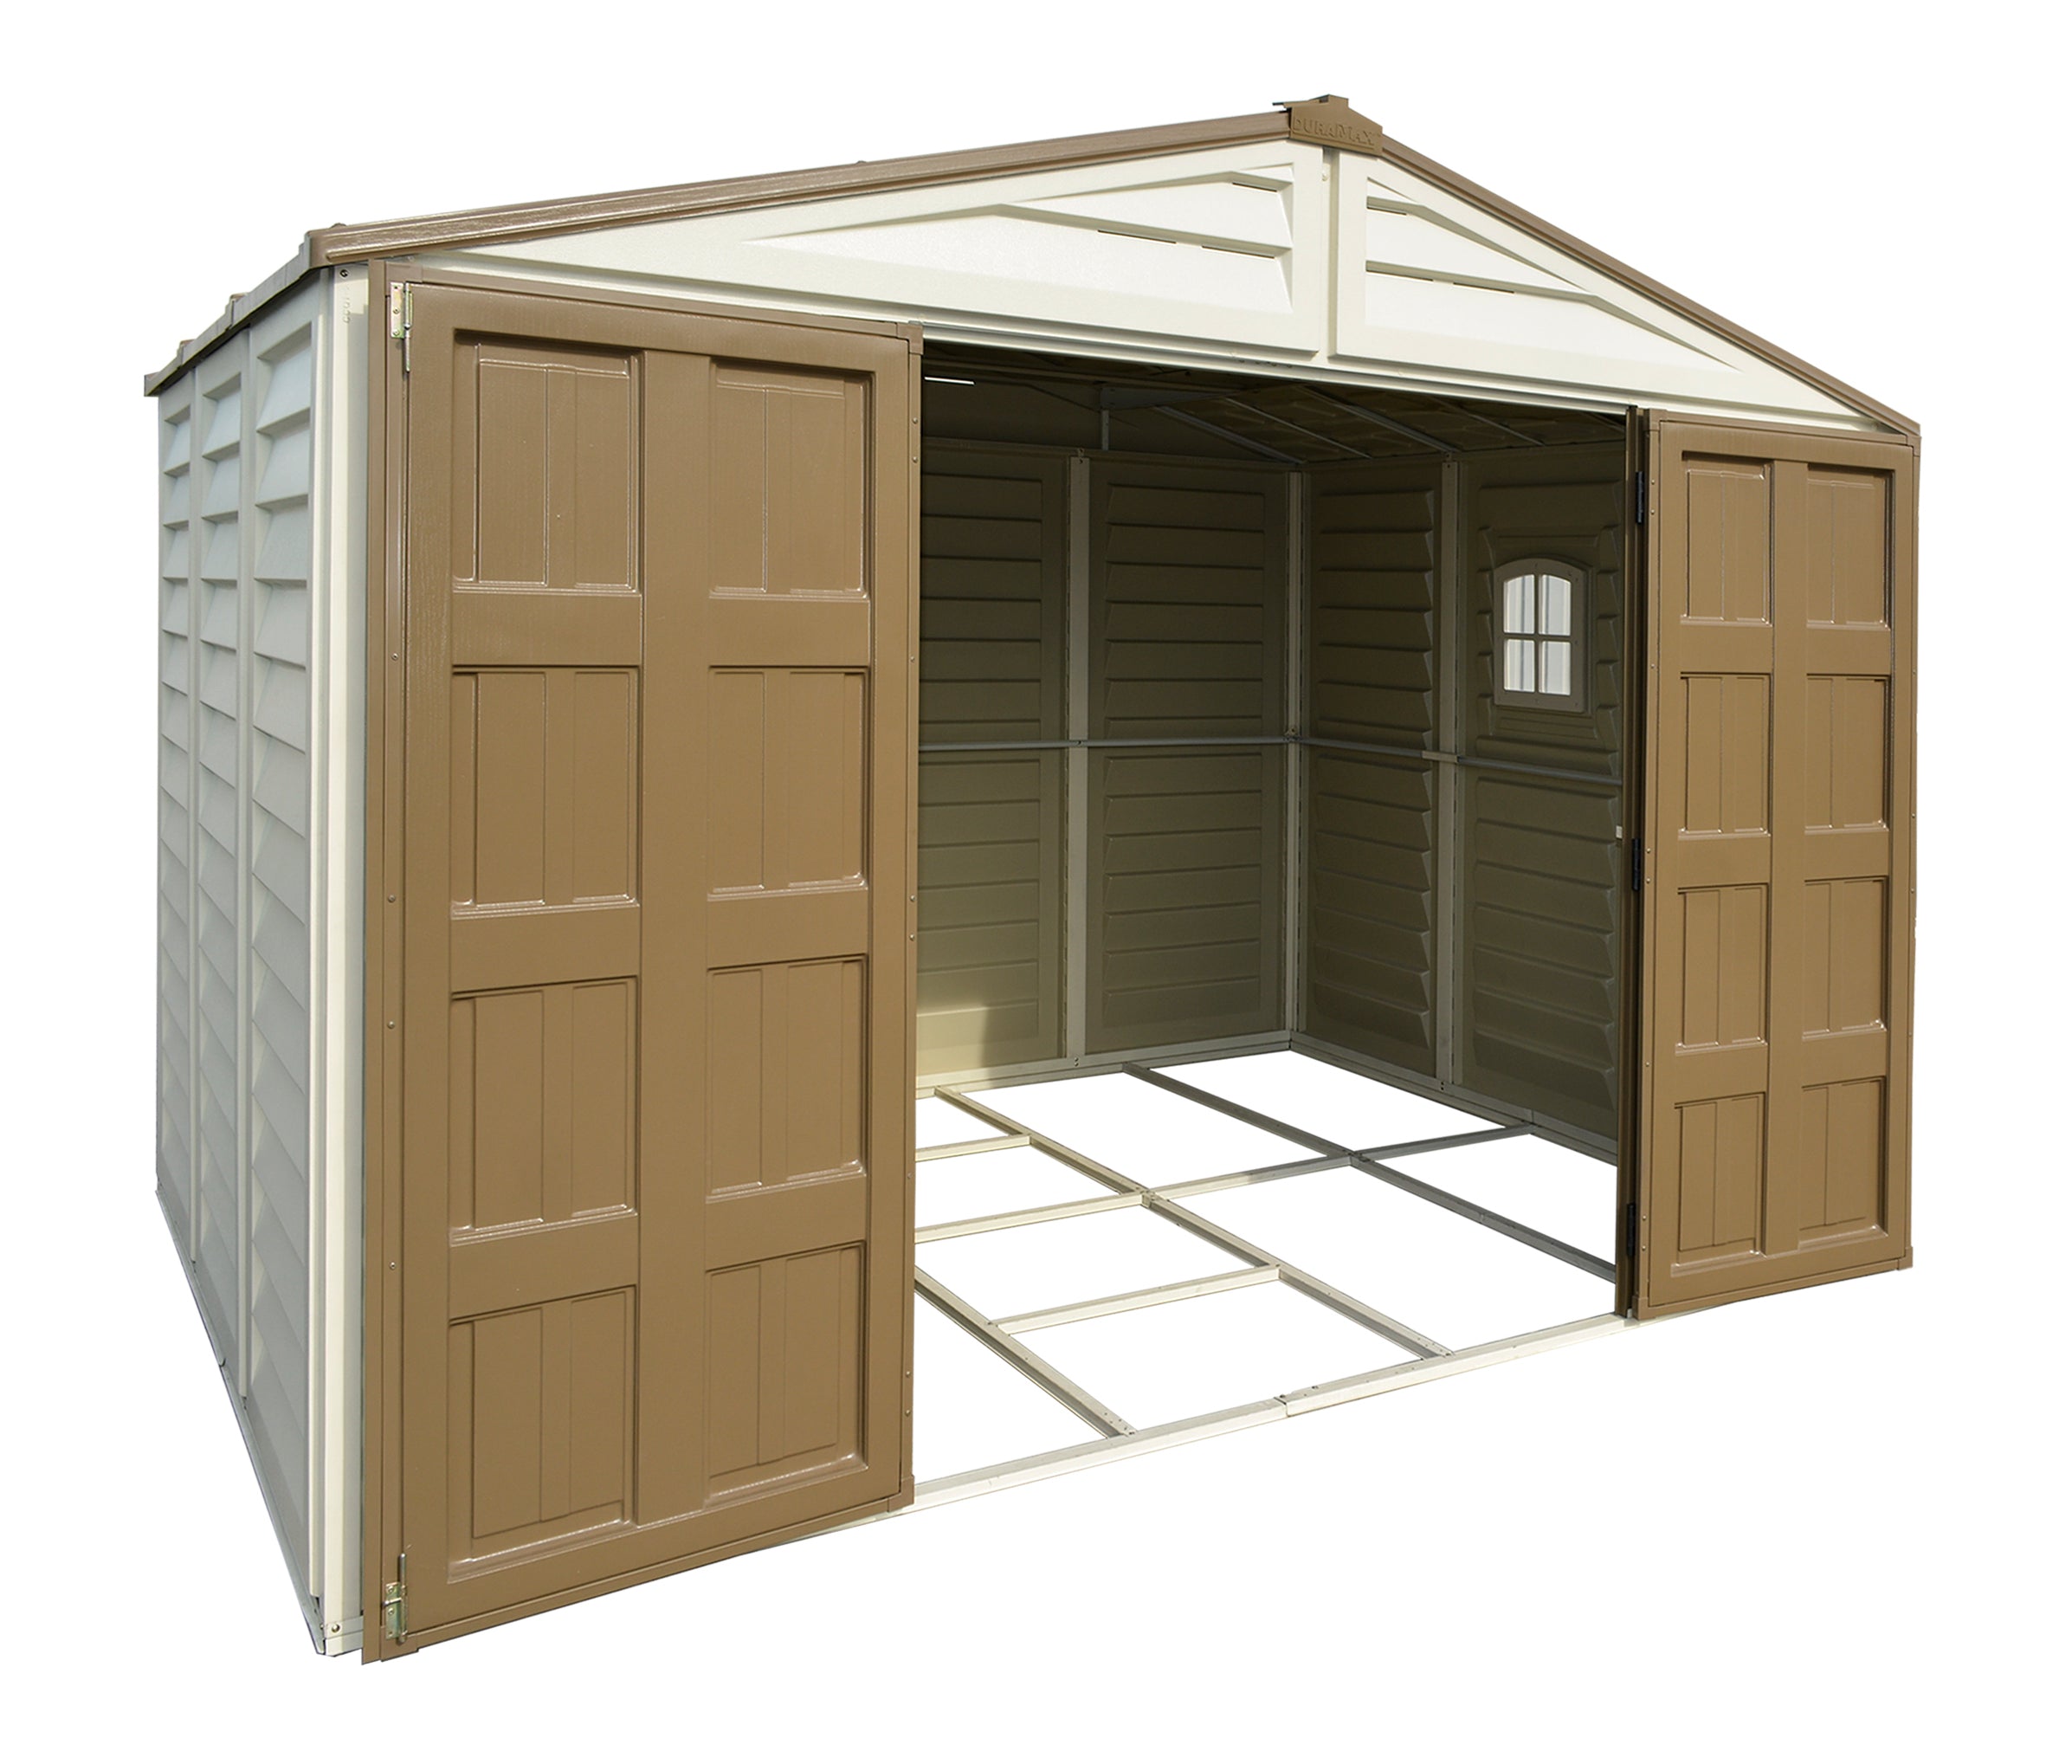 Empty interior of Duramax Woodbridge Plus 10.5x8 Shed with foundation, illustrating the ample storage space and solid build.